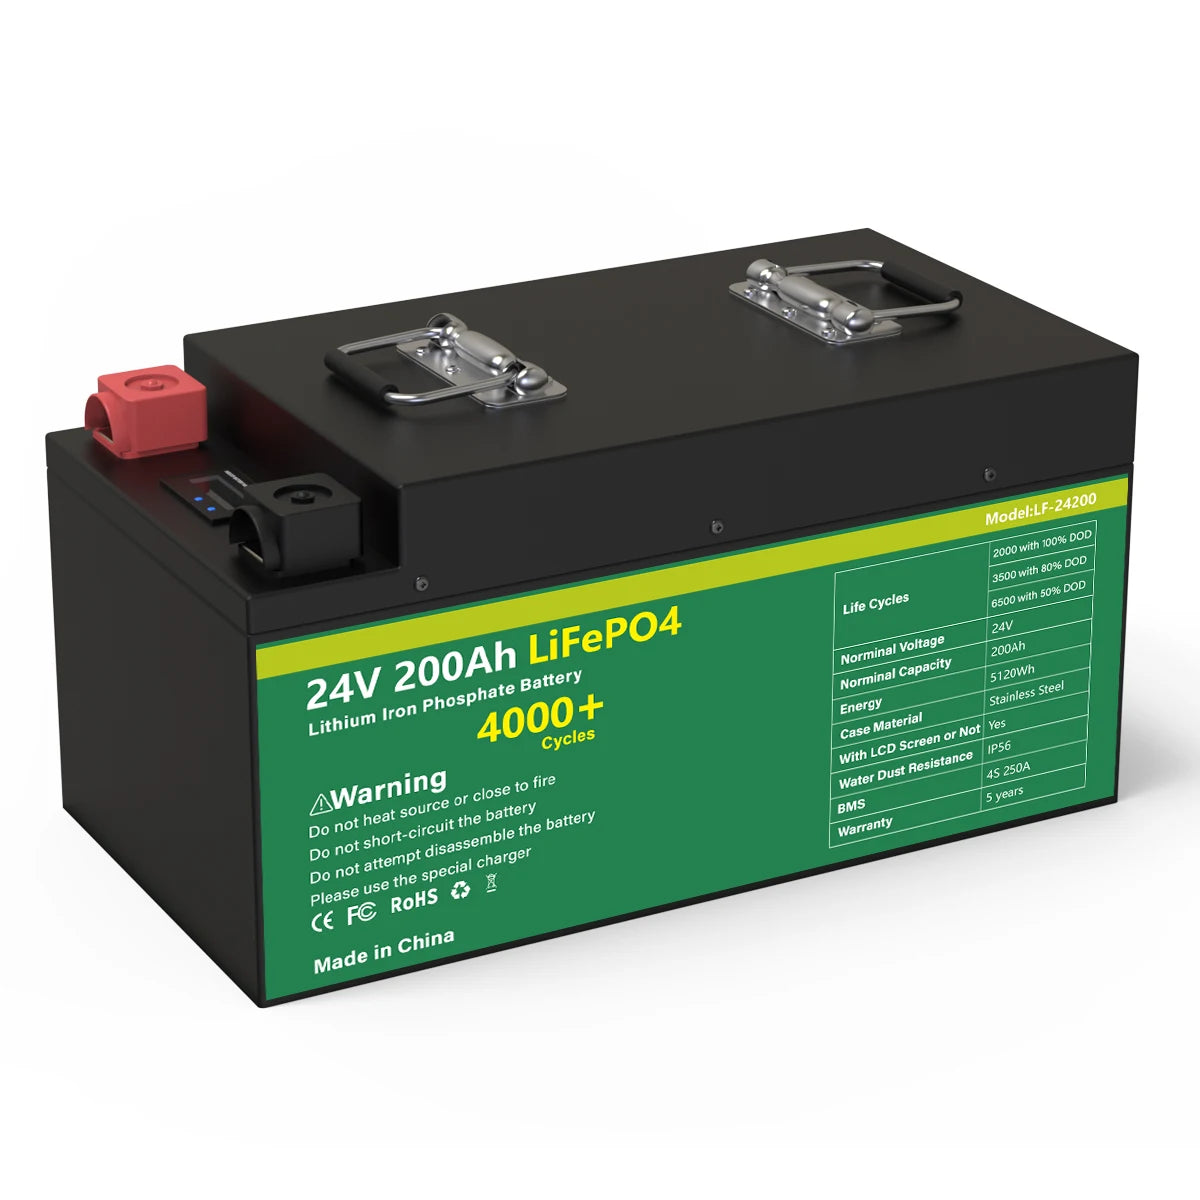 24V 200Ah LiFePO4 Battery Pack with built-in BMS, ROHS certified, featuring high cycle life and safe design.